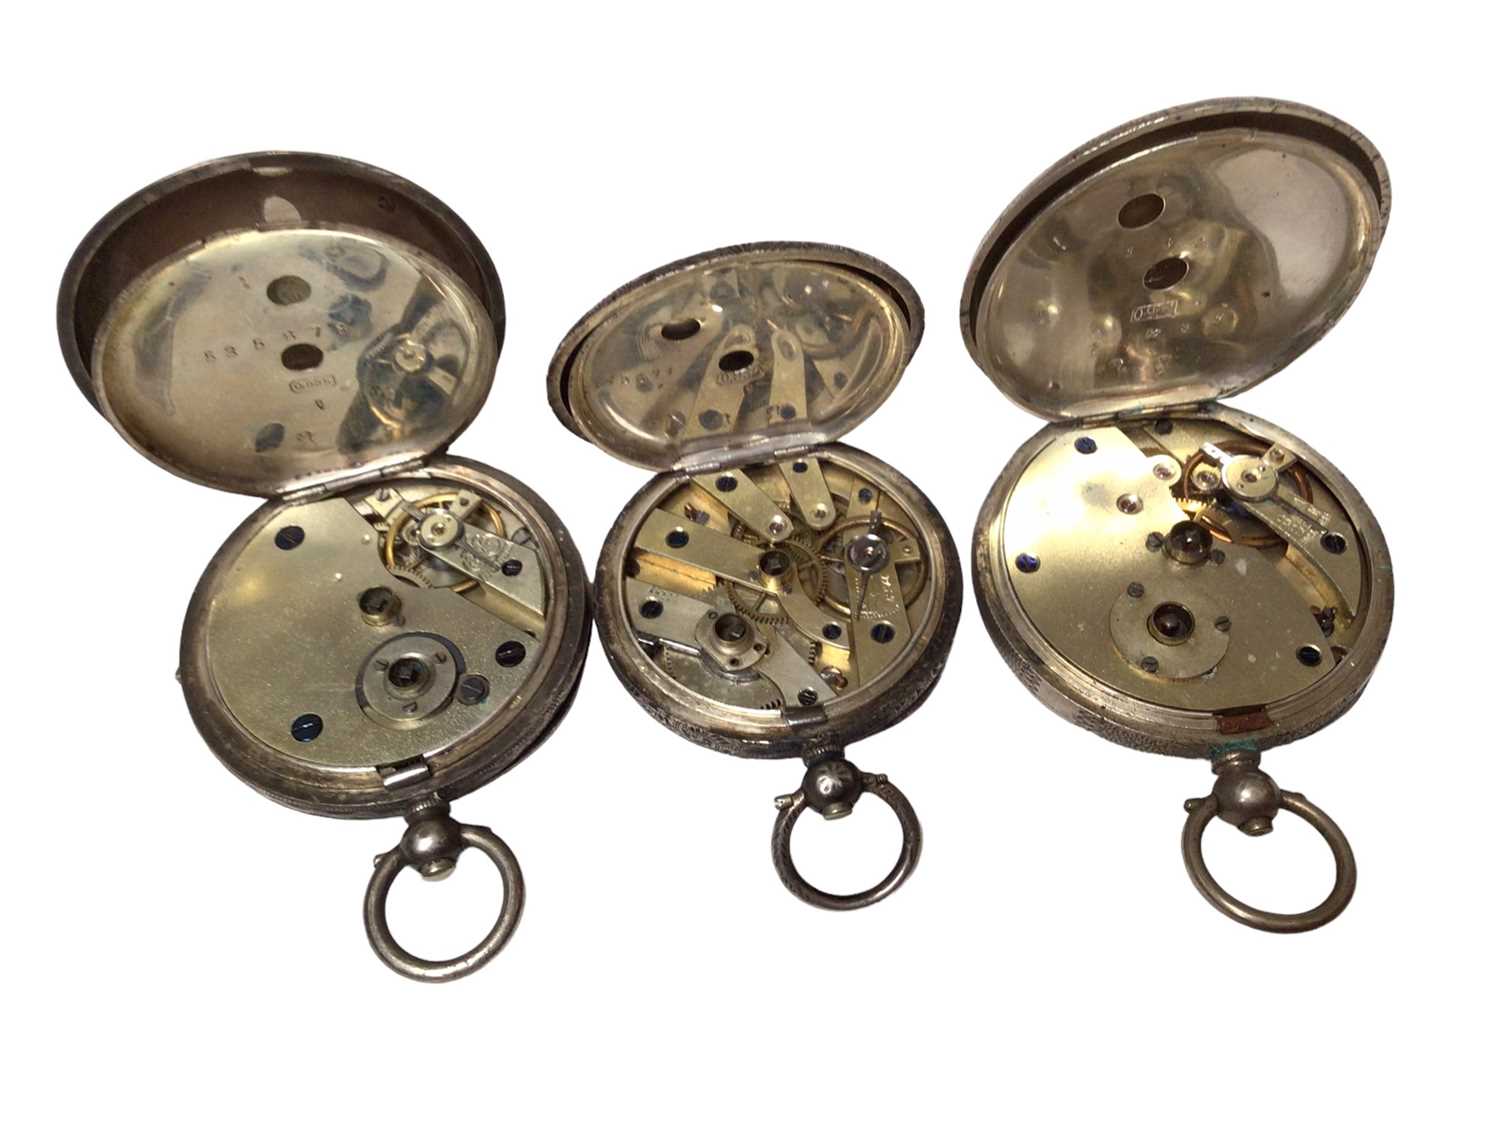 Three late 19th century ladies silver fob watches with painted and jewelled enamel dials - Image 3 of 3